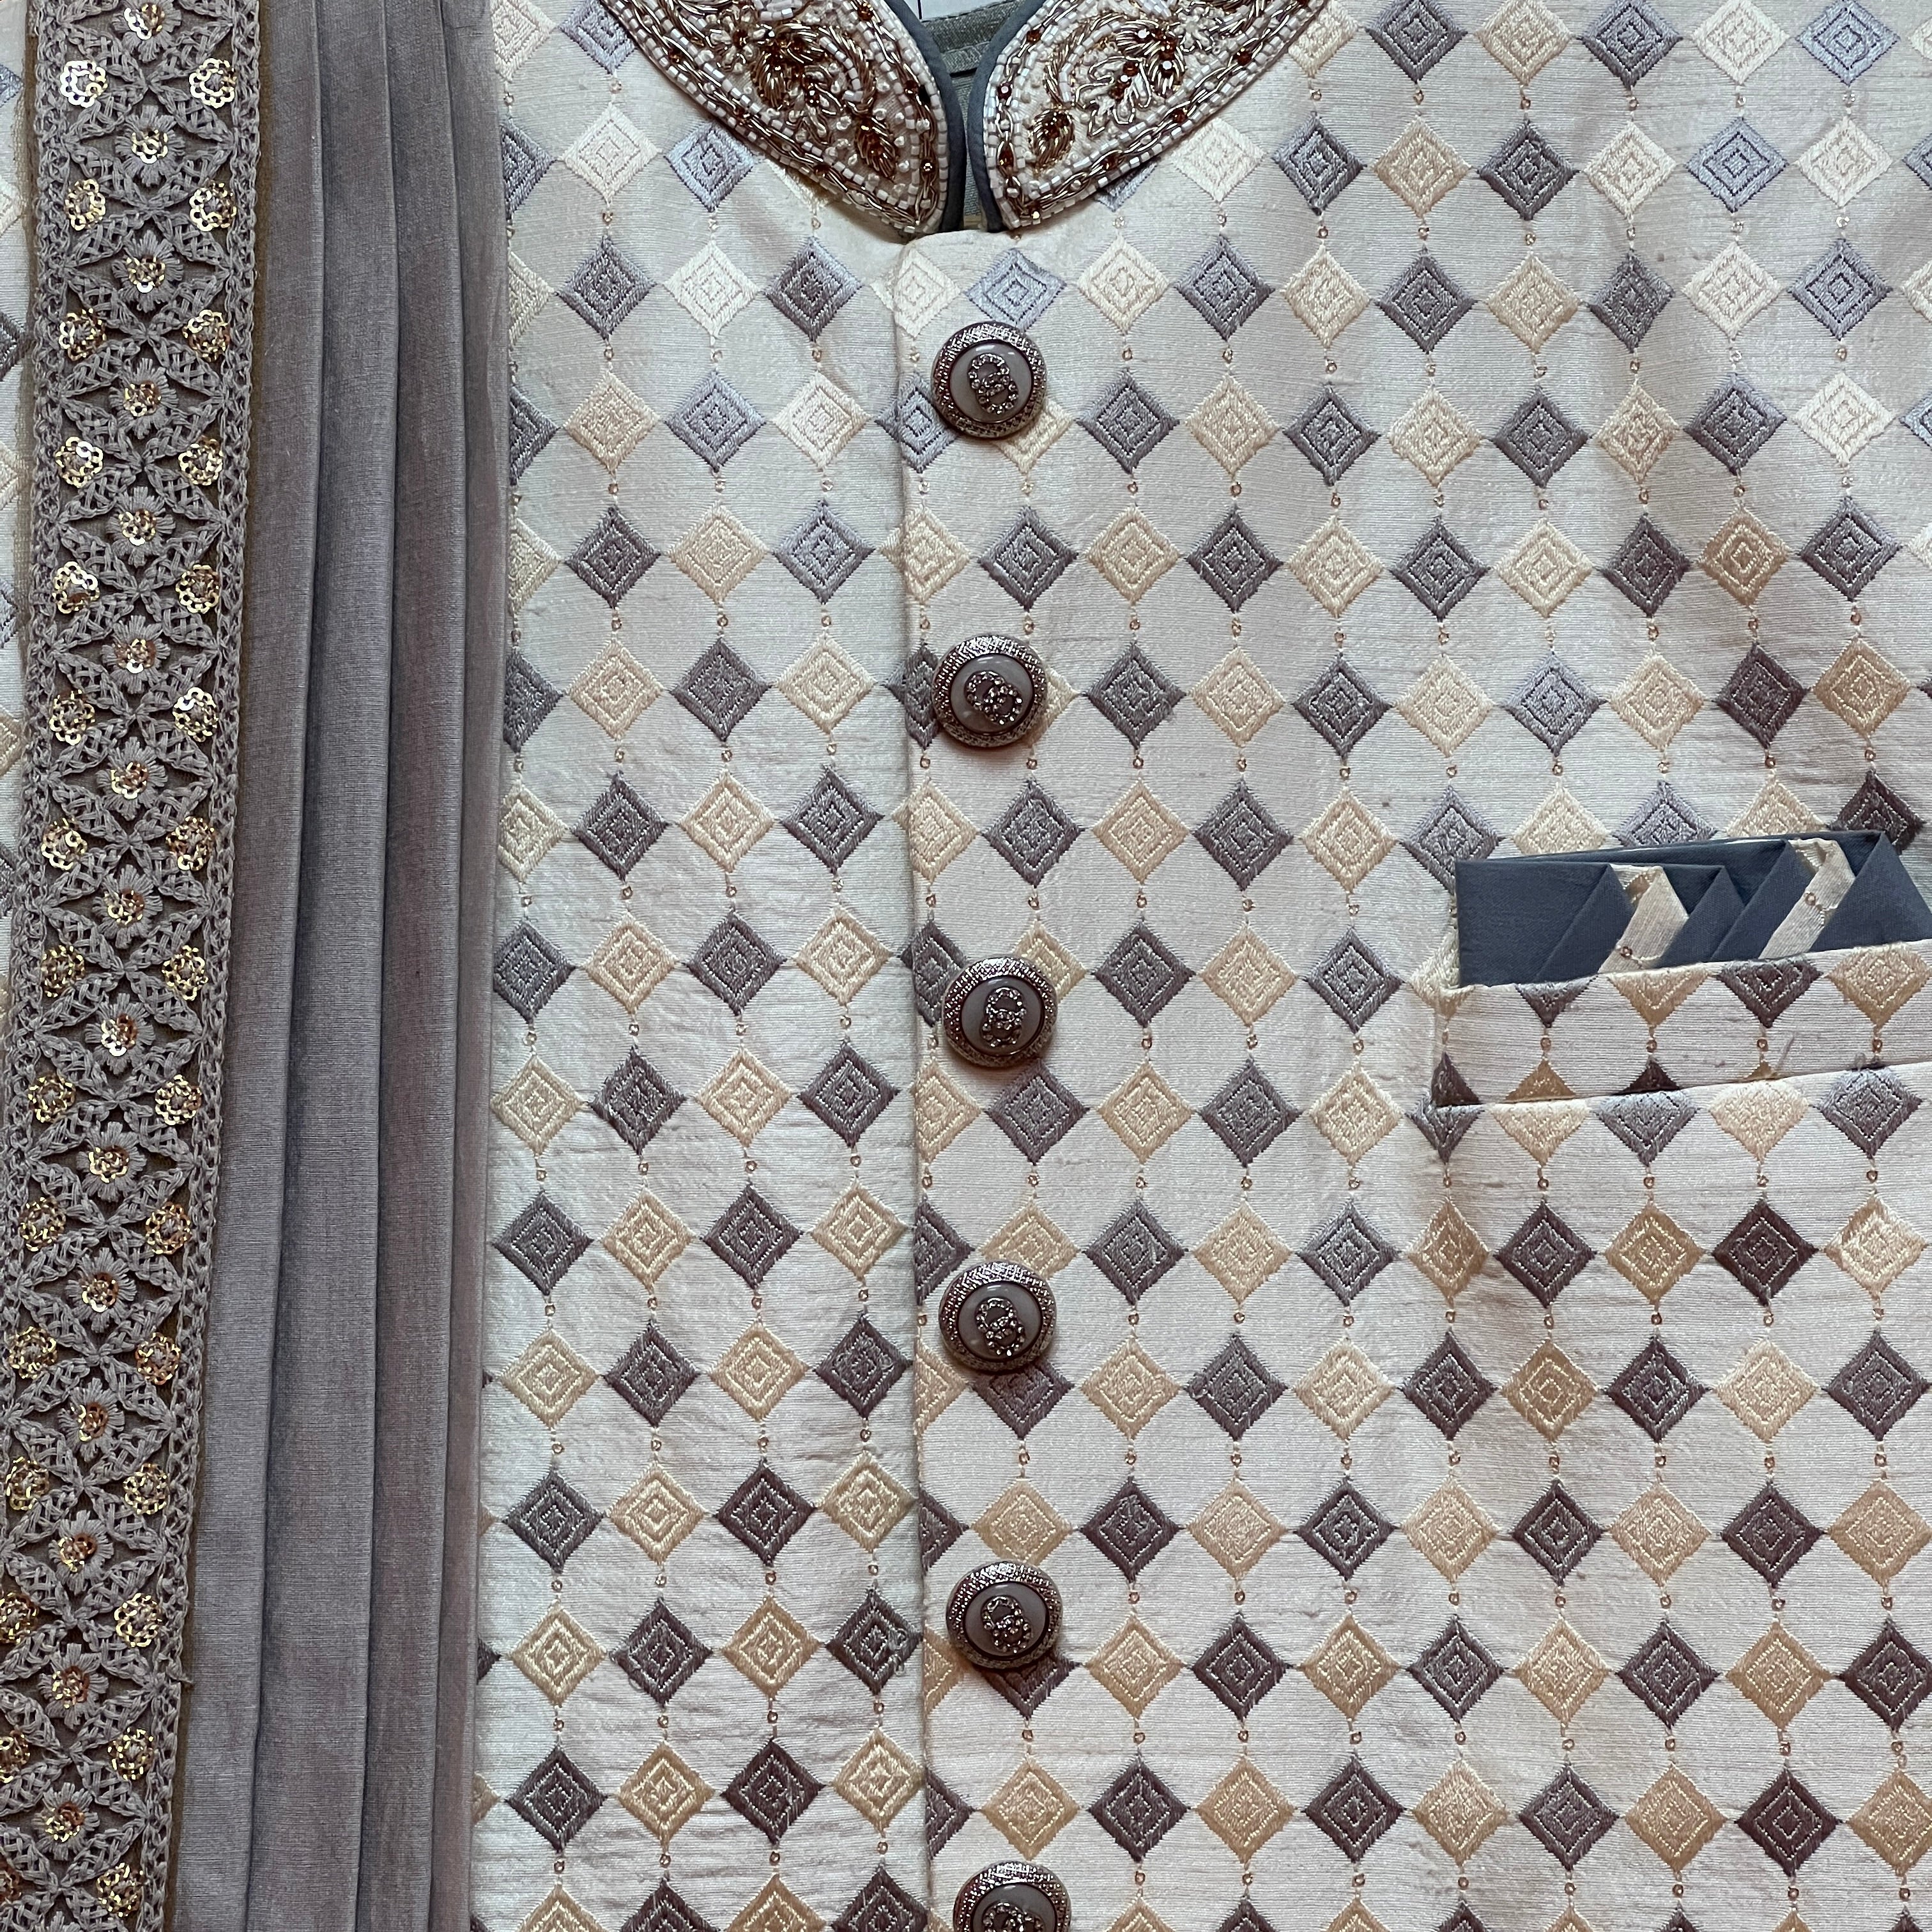 Silver & Gold Embroidered Sherwani - Vintage India NYC